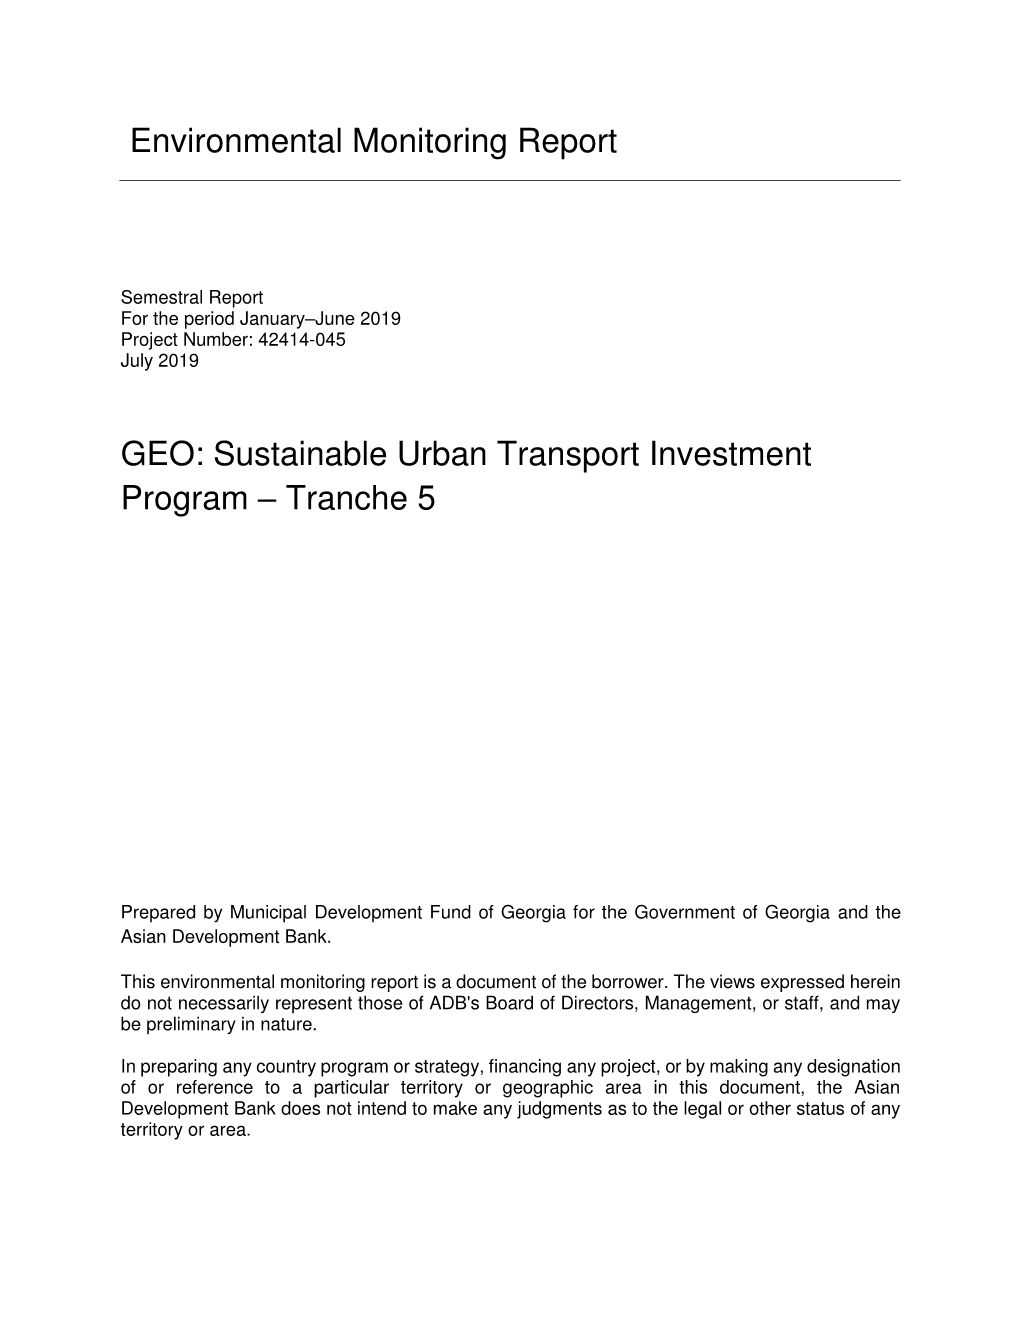 Sustainable Urban Transport Investment Program – Tranche 5